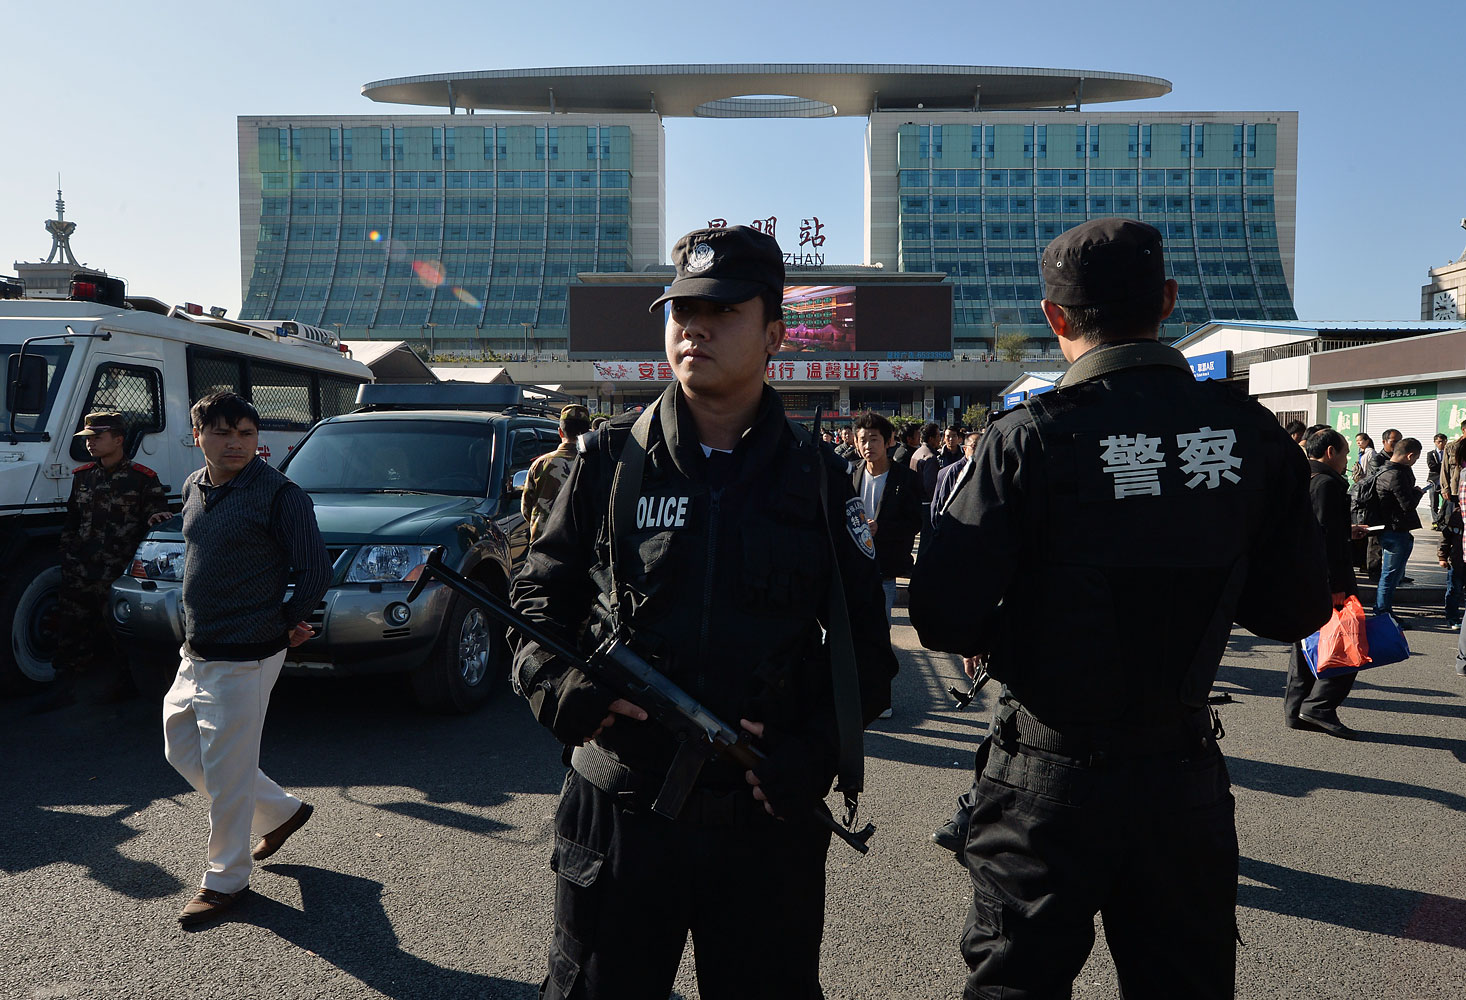 Chinese paramilitary police stand guard outside the scene of the terror attack at the main train station in Kunming, Yunnan Province, on March 3, 2014.